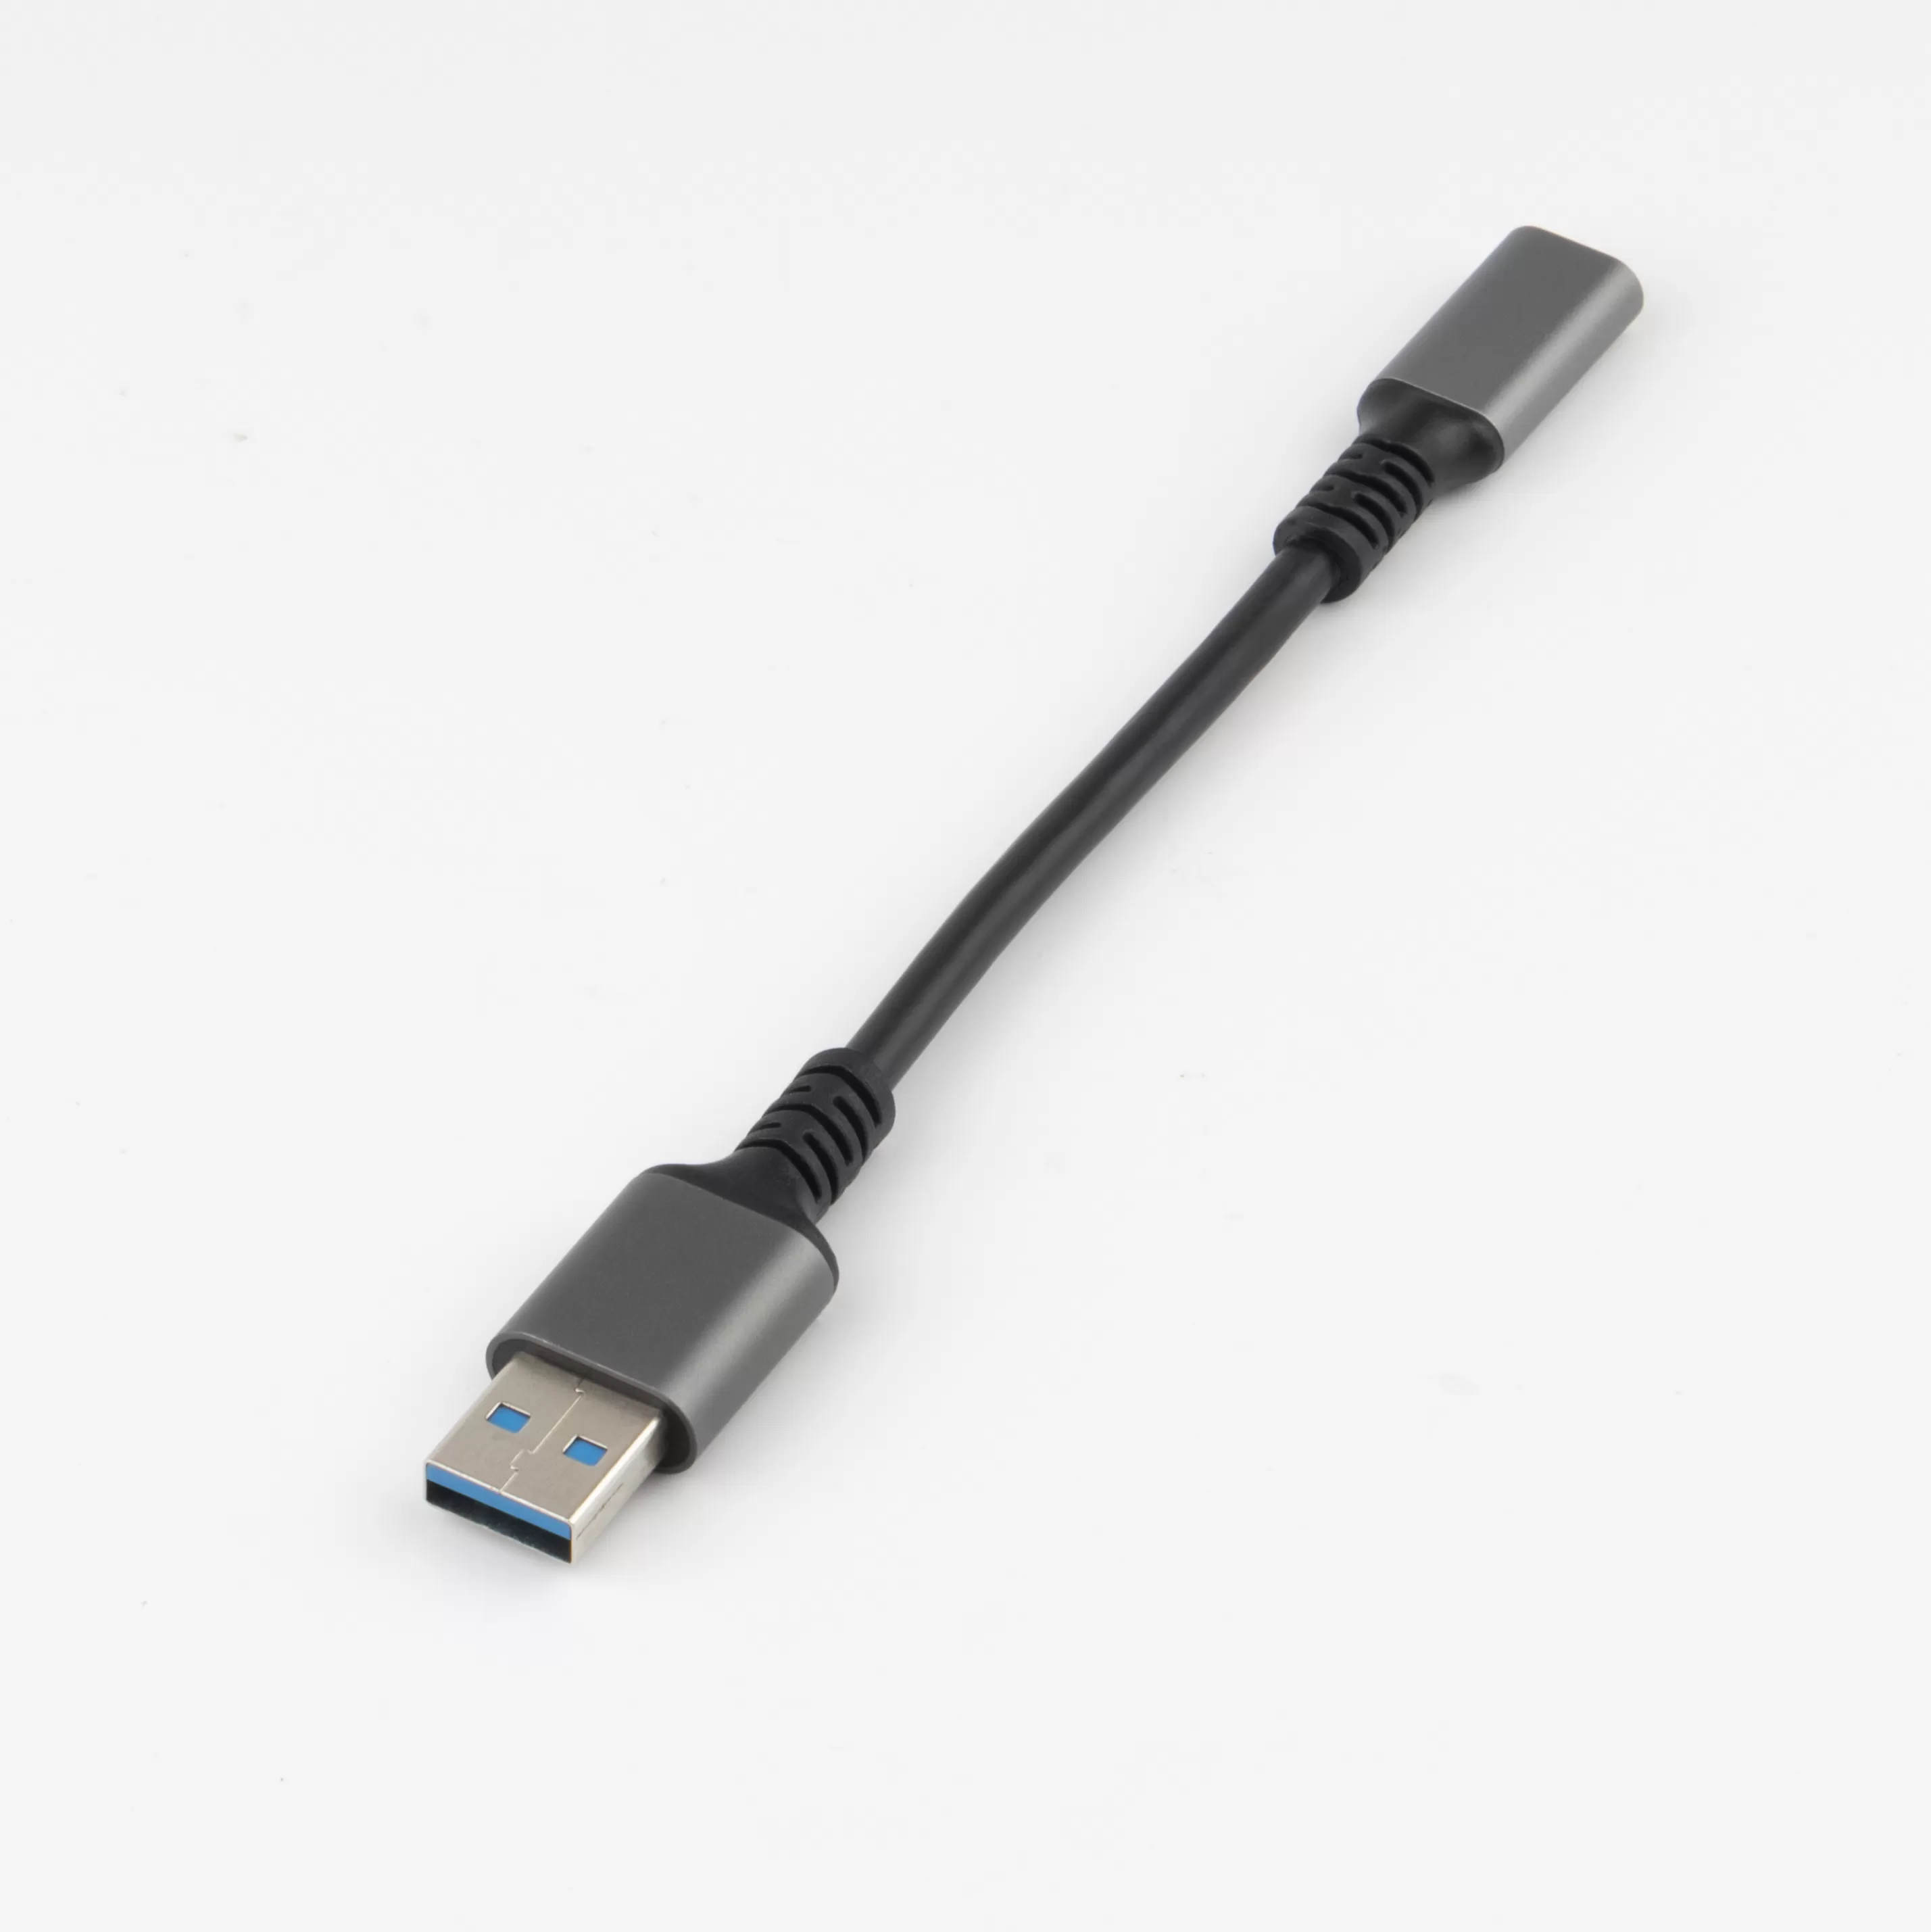 USB3.1 Gen2 usb c female to usb a cable